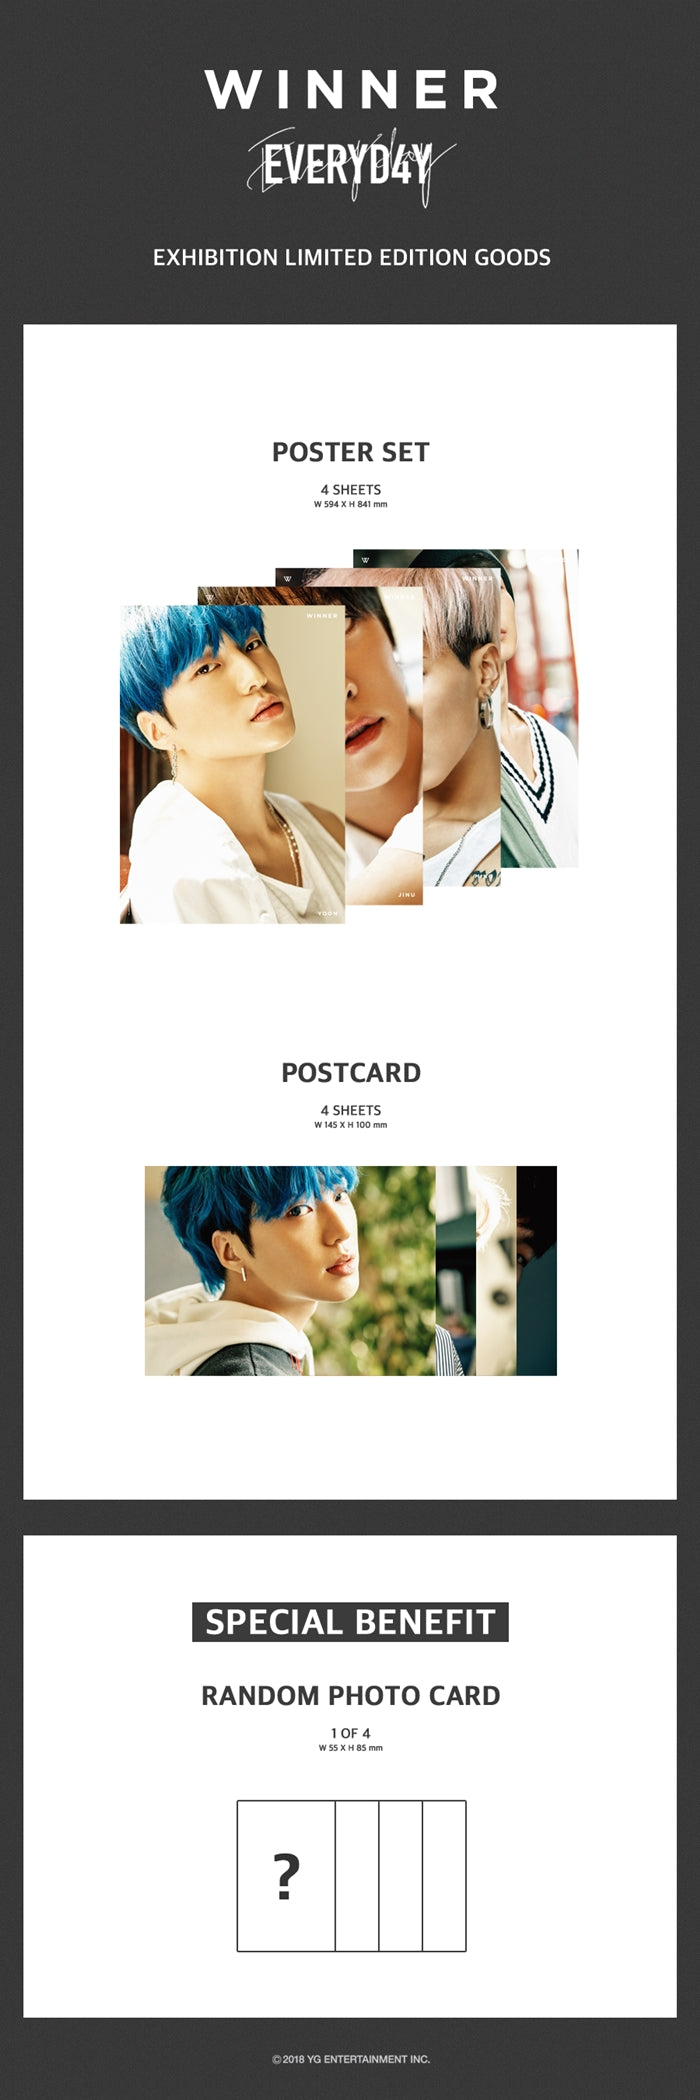 Winner - [Exhibition Limited Edition Goods]